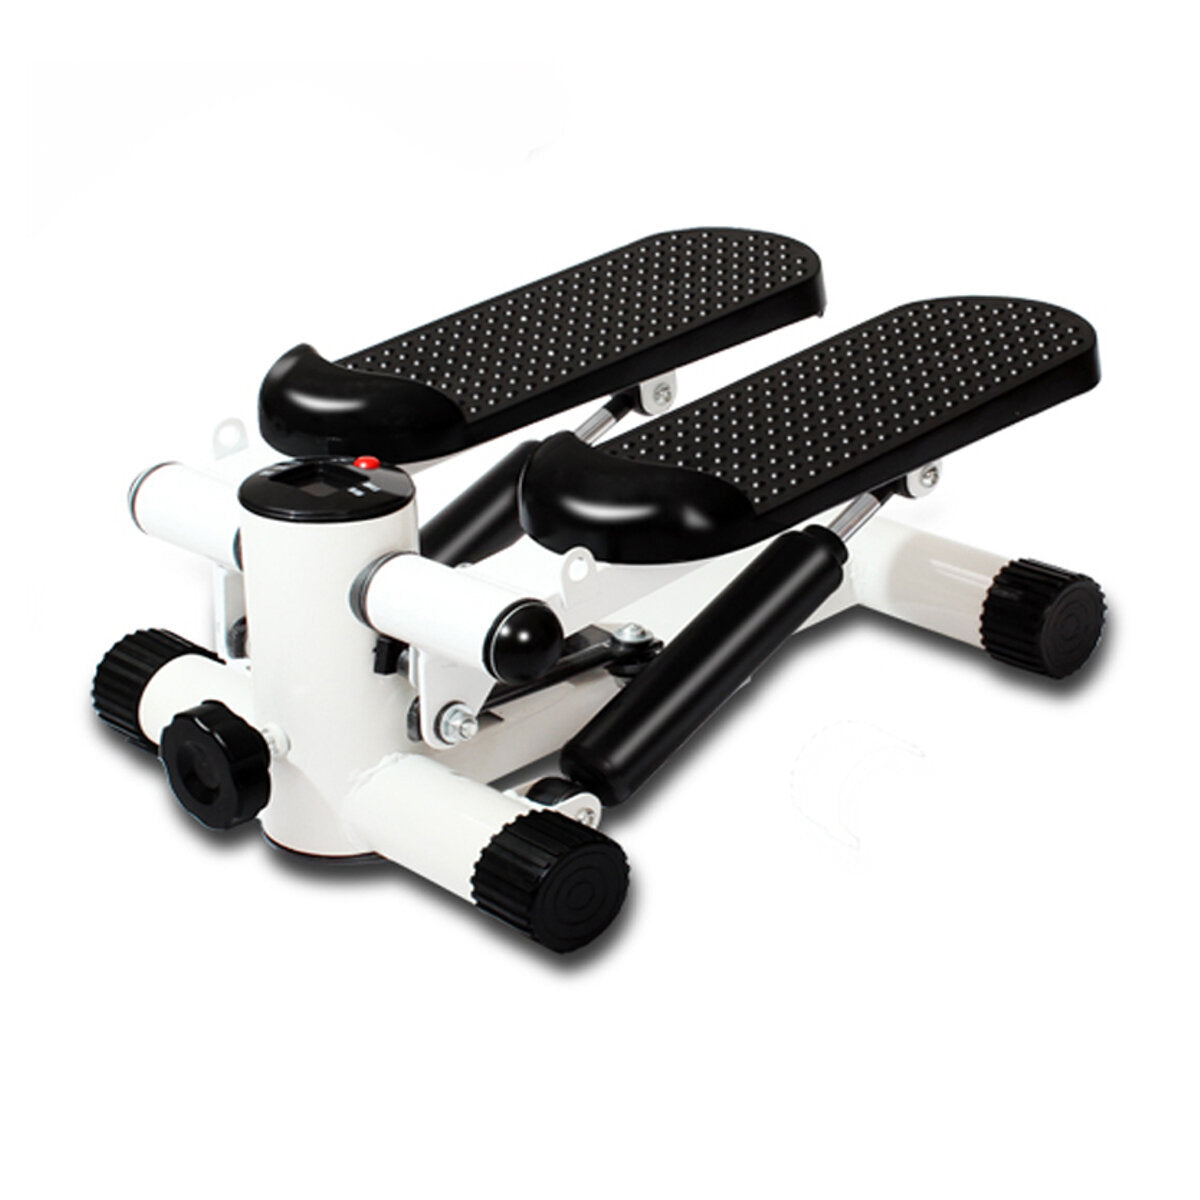 Multi-functional Fitness Equipment Steppers Leg Step Fitness Machine With Handle Bar And LCD Monitor